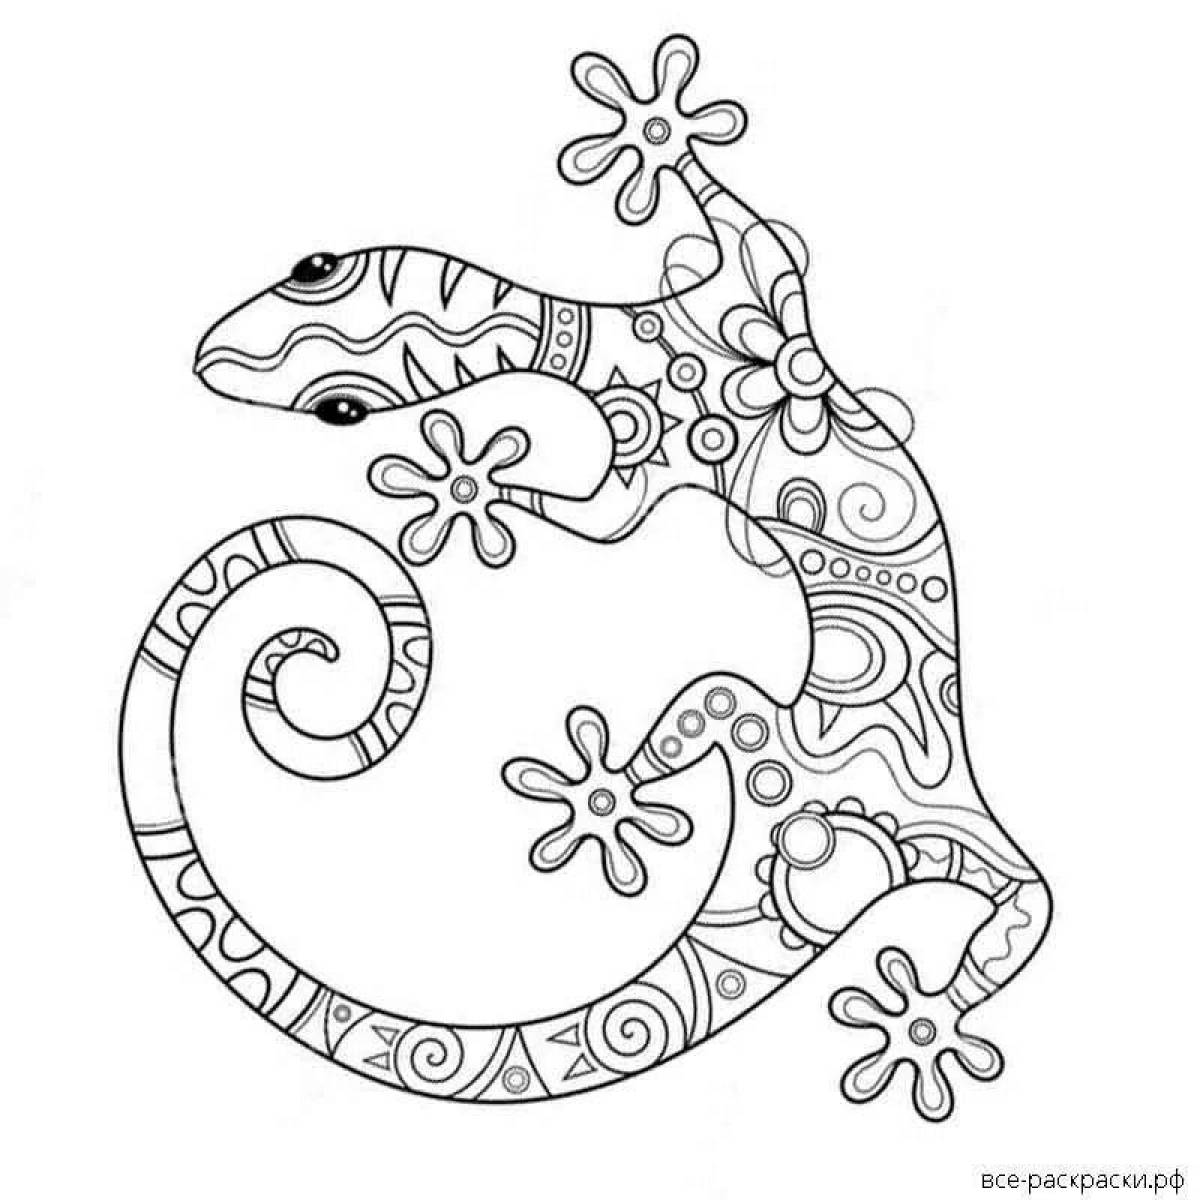 A spectacular lizard coloring page